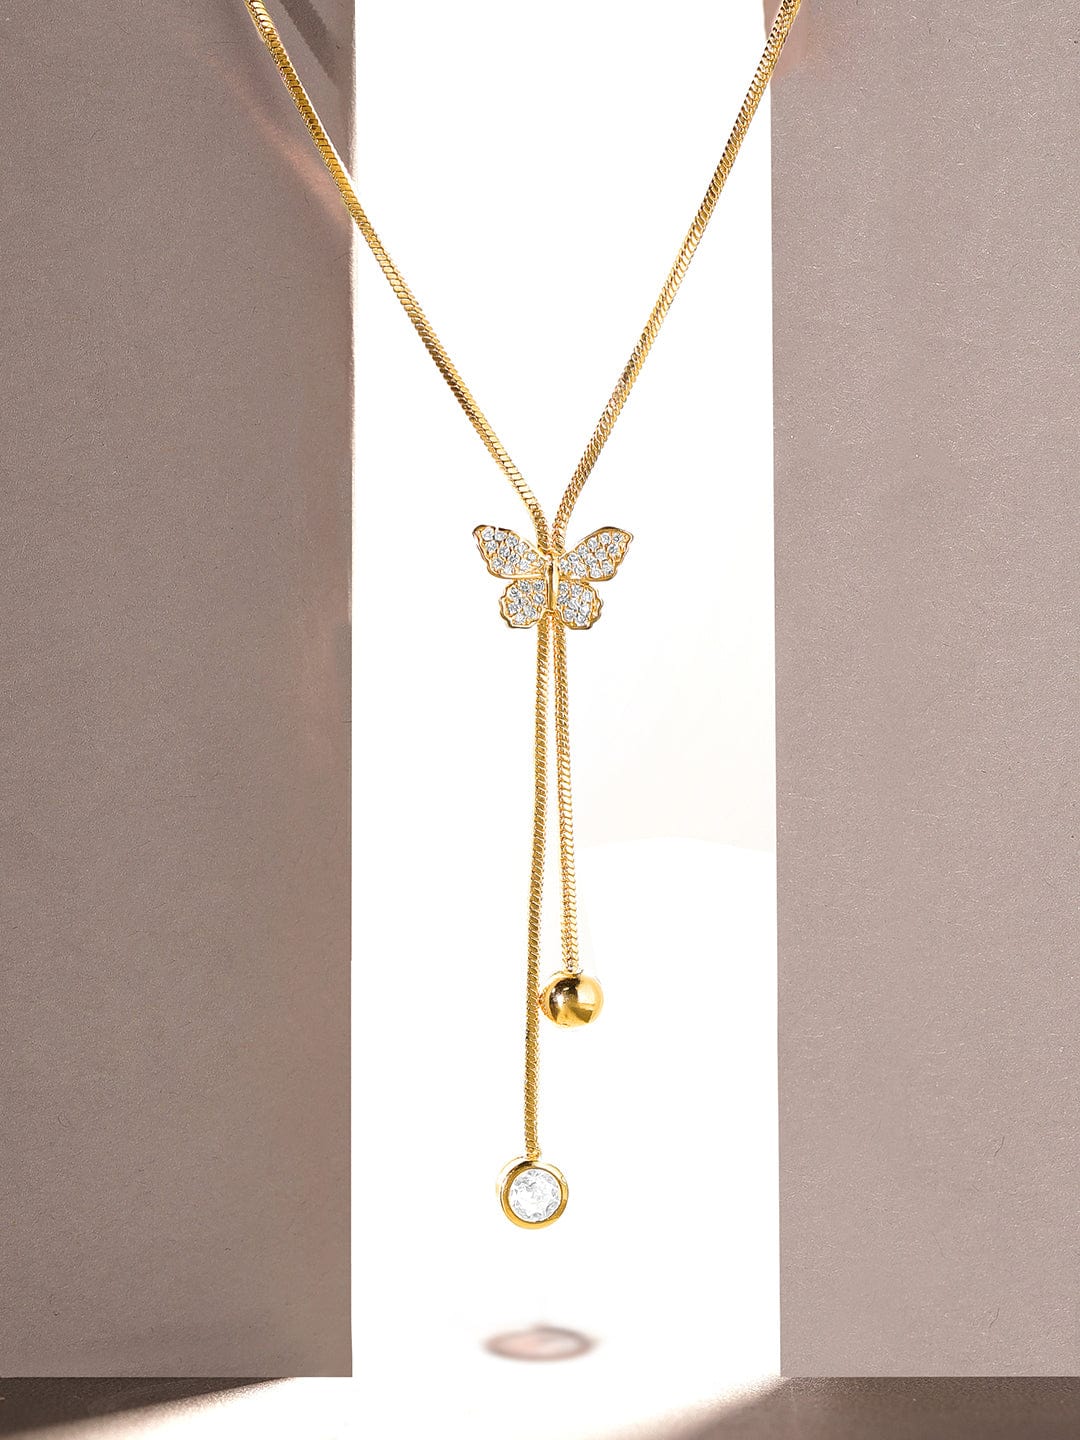 Rubans 18K Gold Plated, Minimal Chain Butterfly Motif Zircons Studded Drop Pendant Necklace. Chain & Necklaces